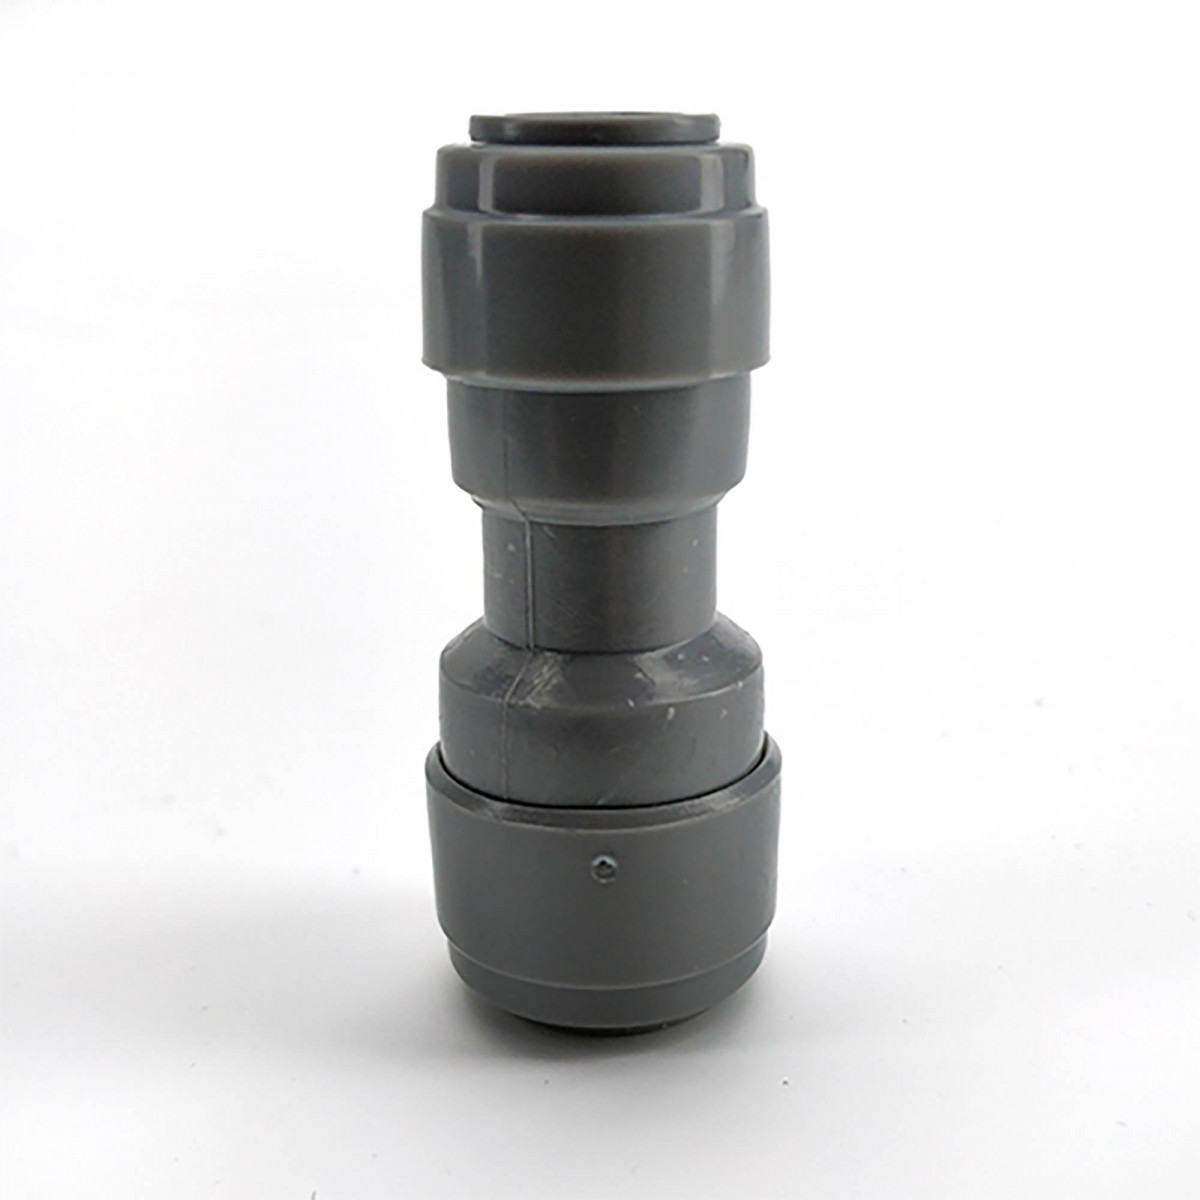 Duotight reducer 9.5 mm (3/8”) to 8 mm (5/16”)